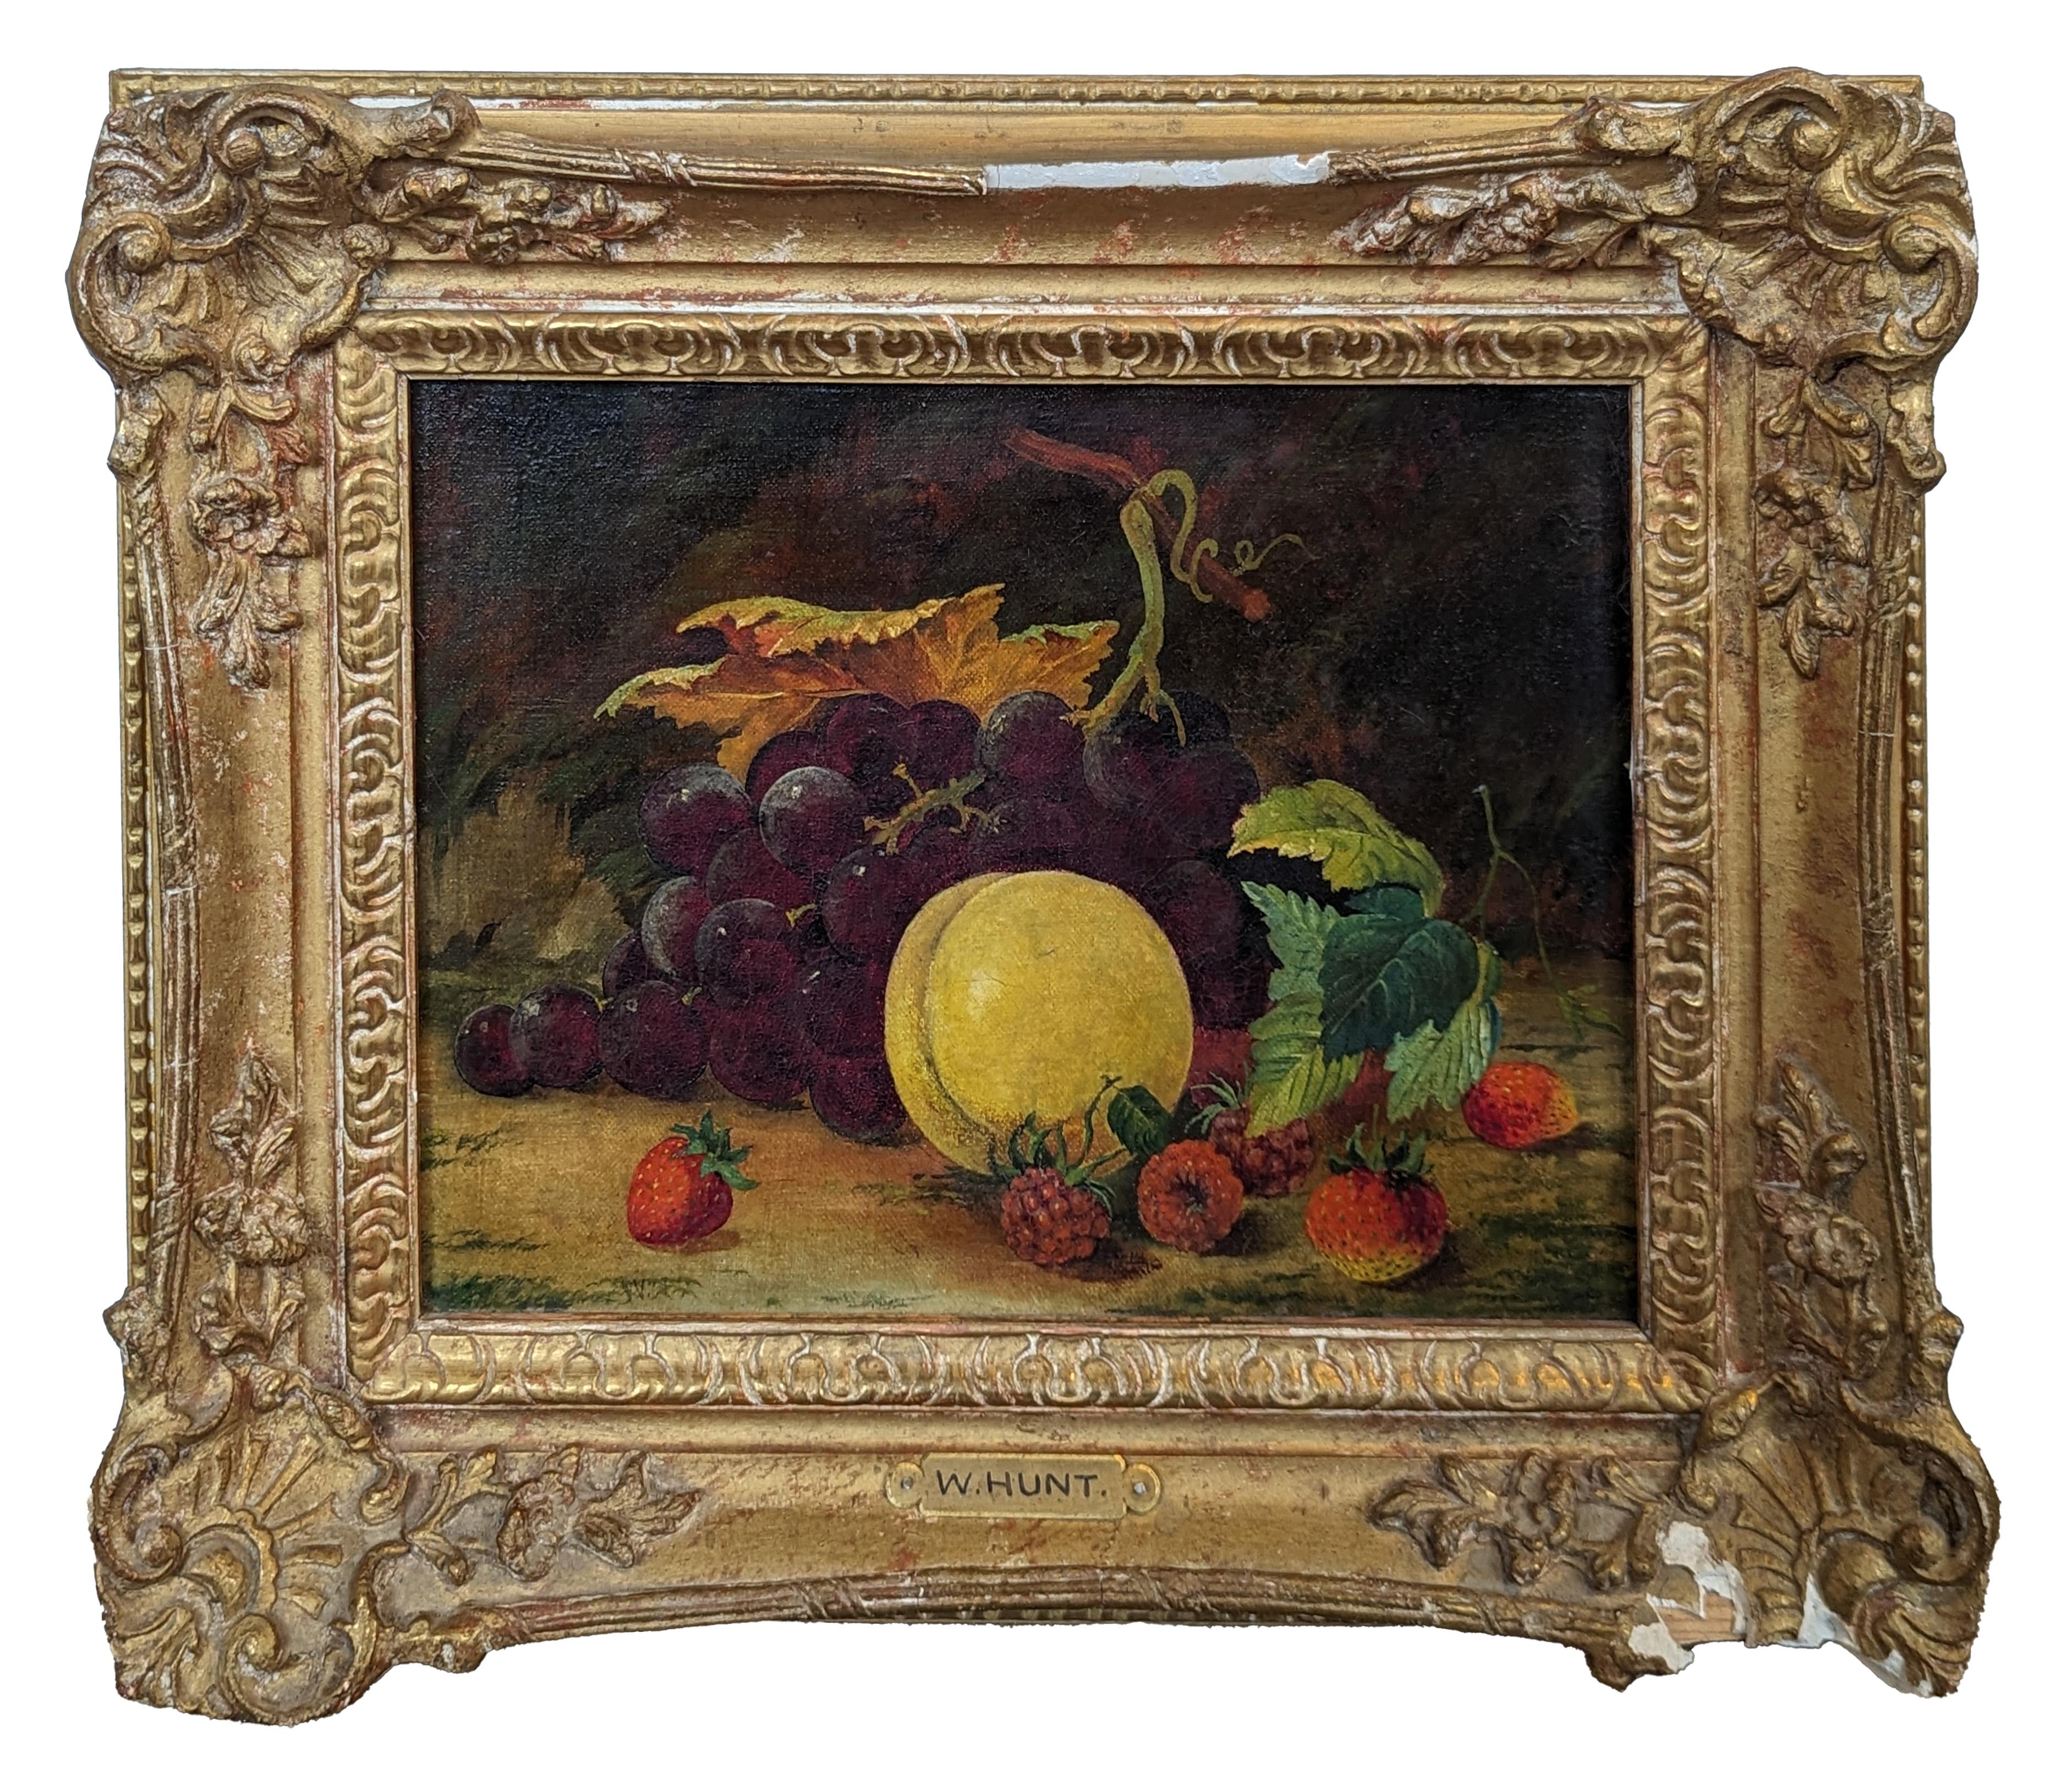 Early Naturalistic Still Life Oil Painting of Strawberries and Grapes